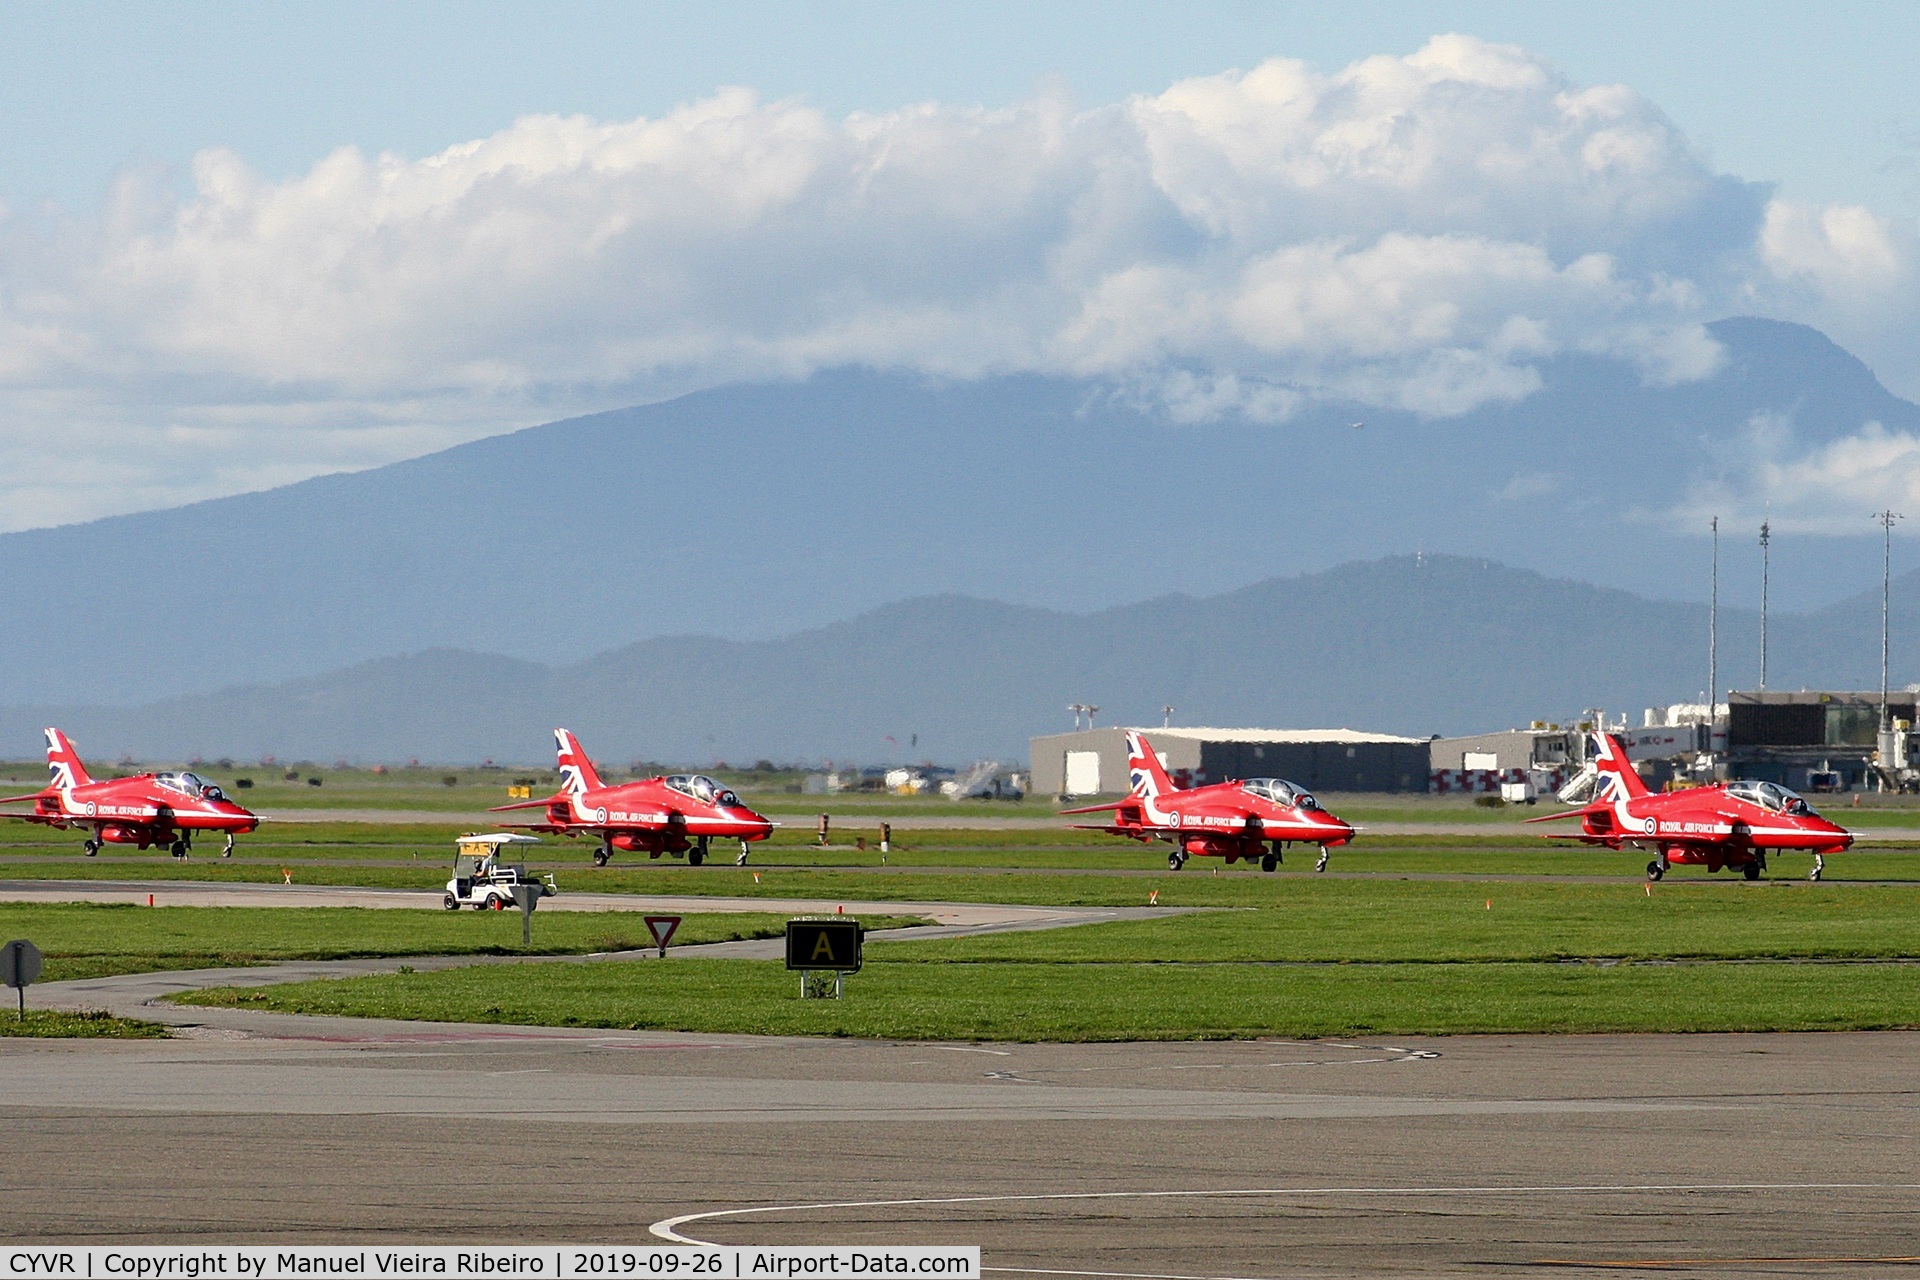 Vancouver International Airport, Vancouver, British Columbia Canada (CYVR) - Red Arrows 2019 North American tour